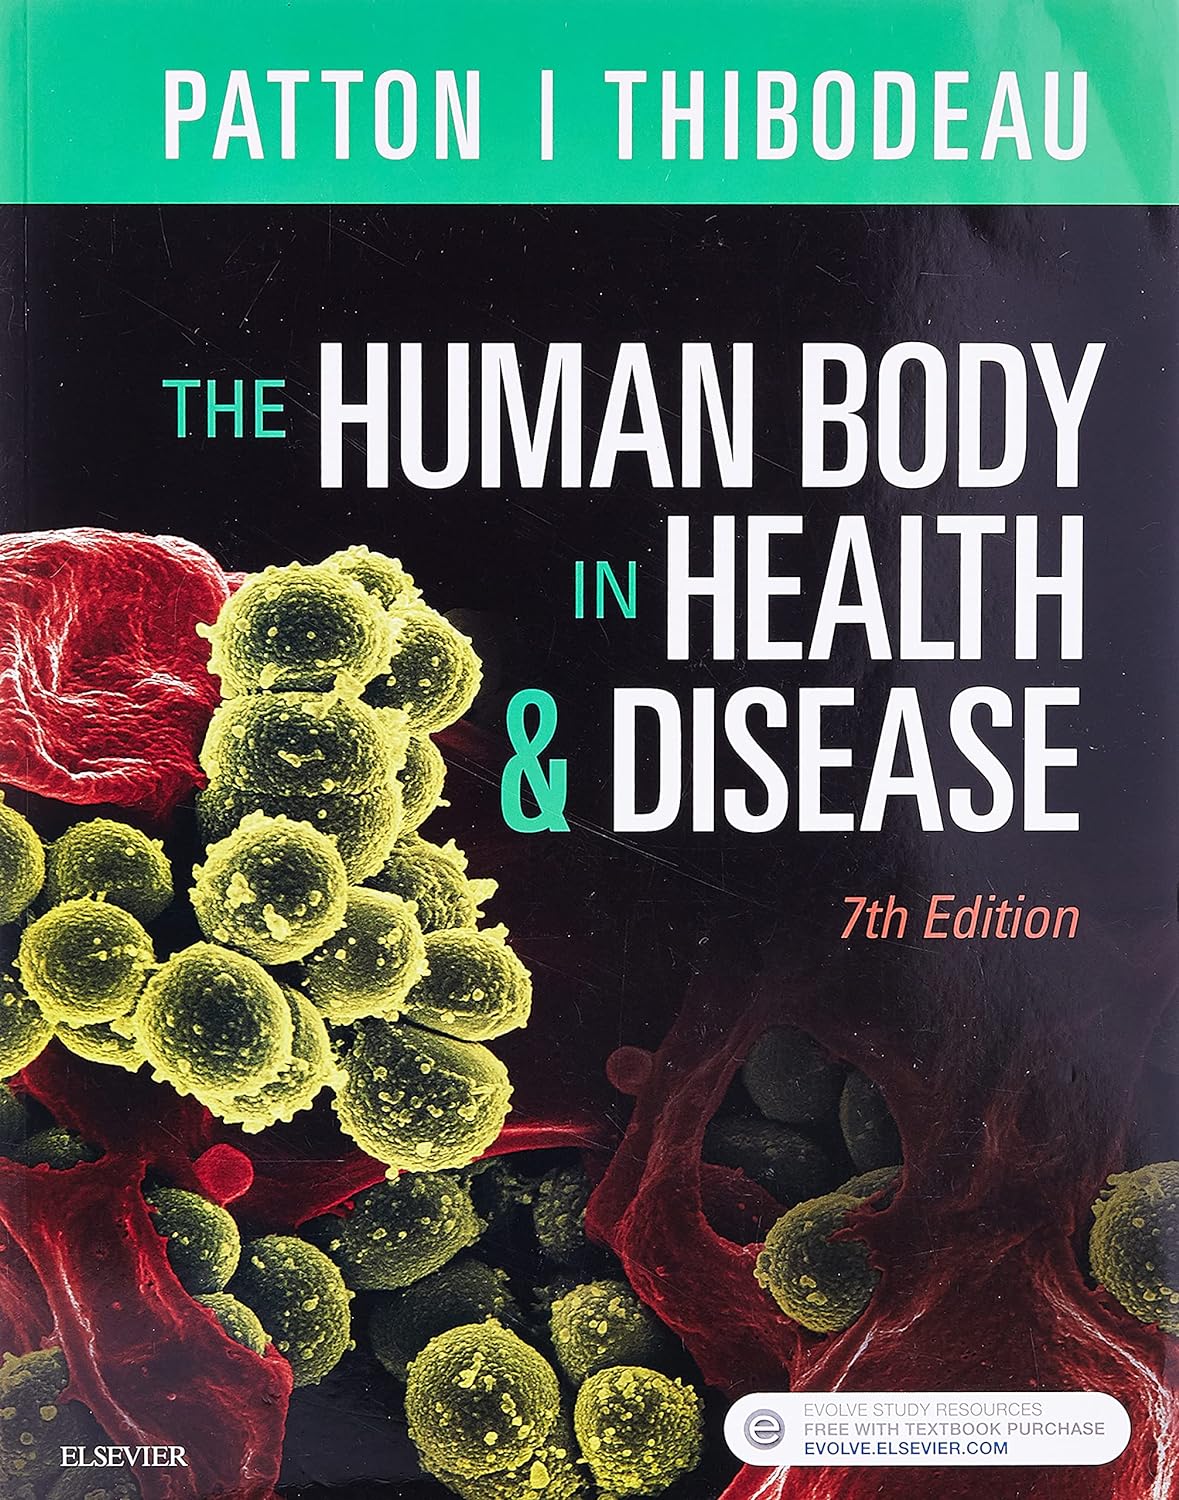 The Human Body in Health & Disease  7th Edition (with Study guide)